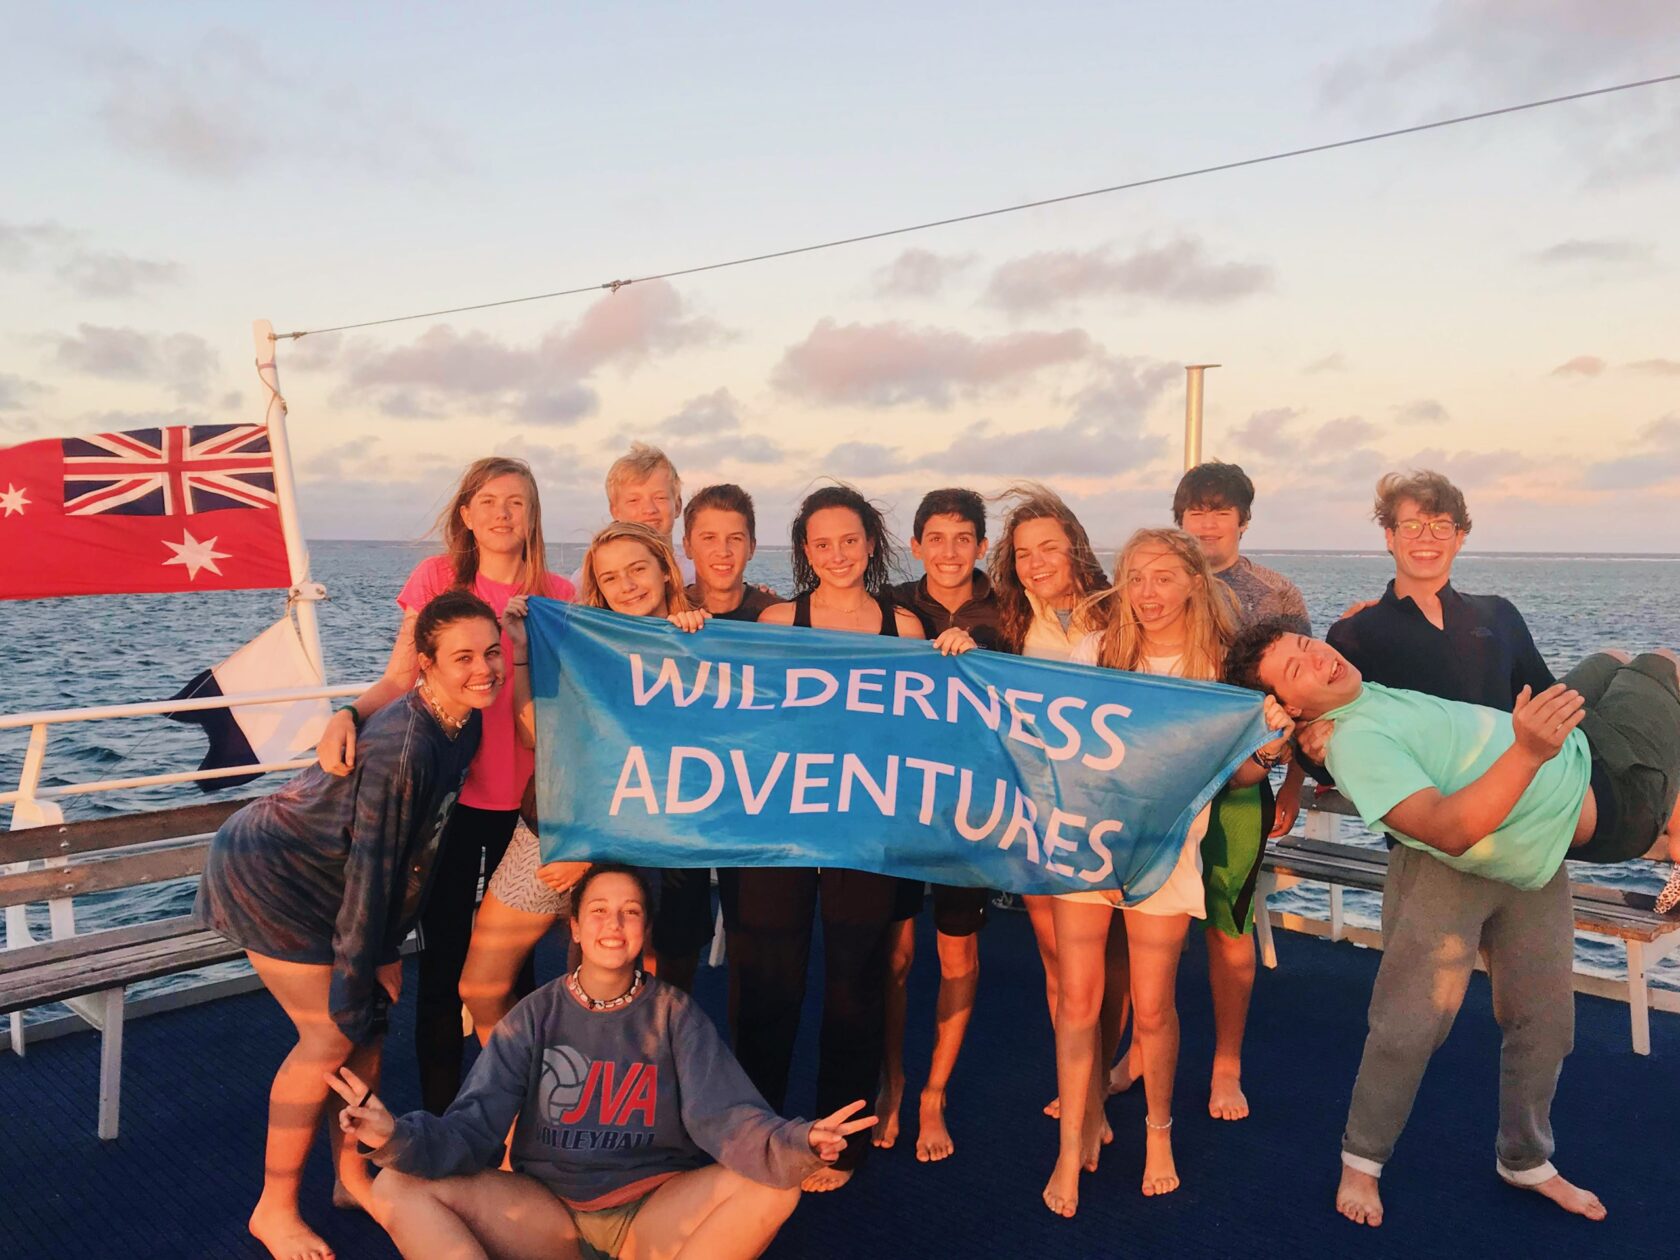 Group of people holding up a Wilderness Adventures banner on a boat with the Australian flag in the background.